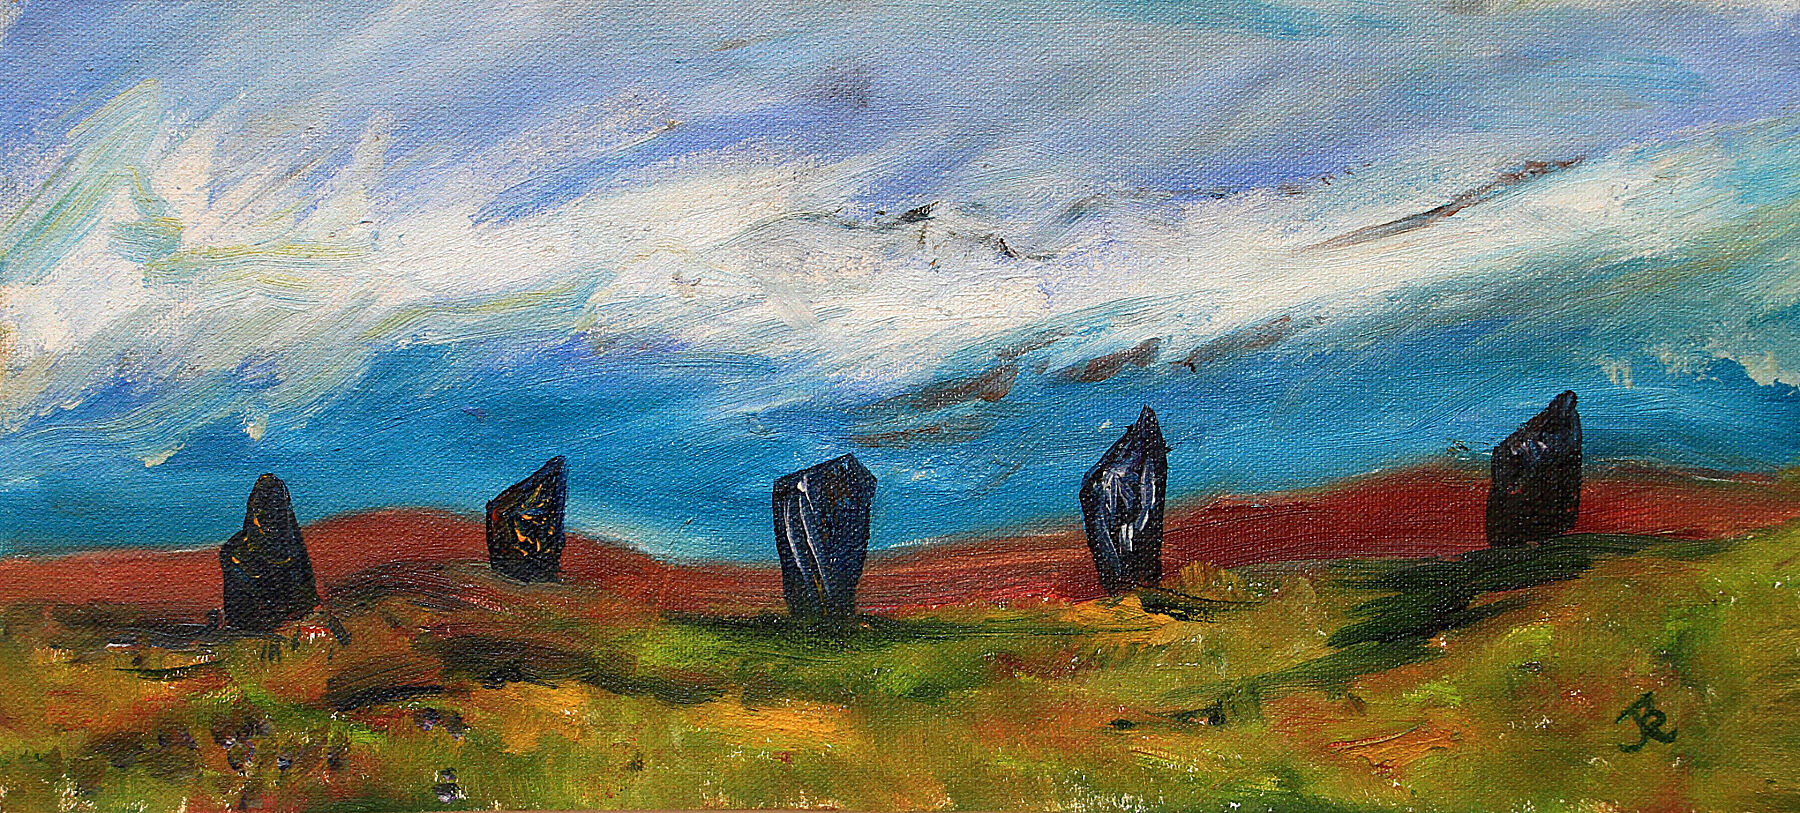 print of Ring of Brodgar Orkney, Scotland, by Jeanne Bouza Rose